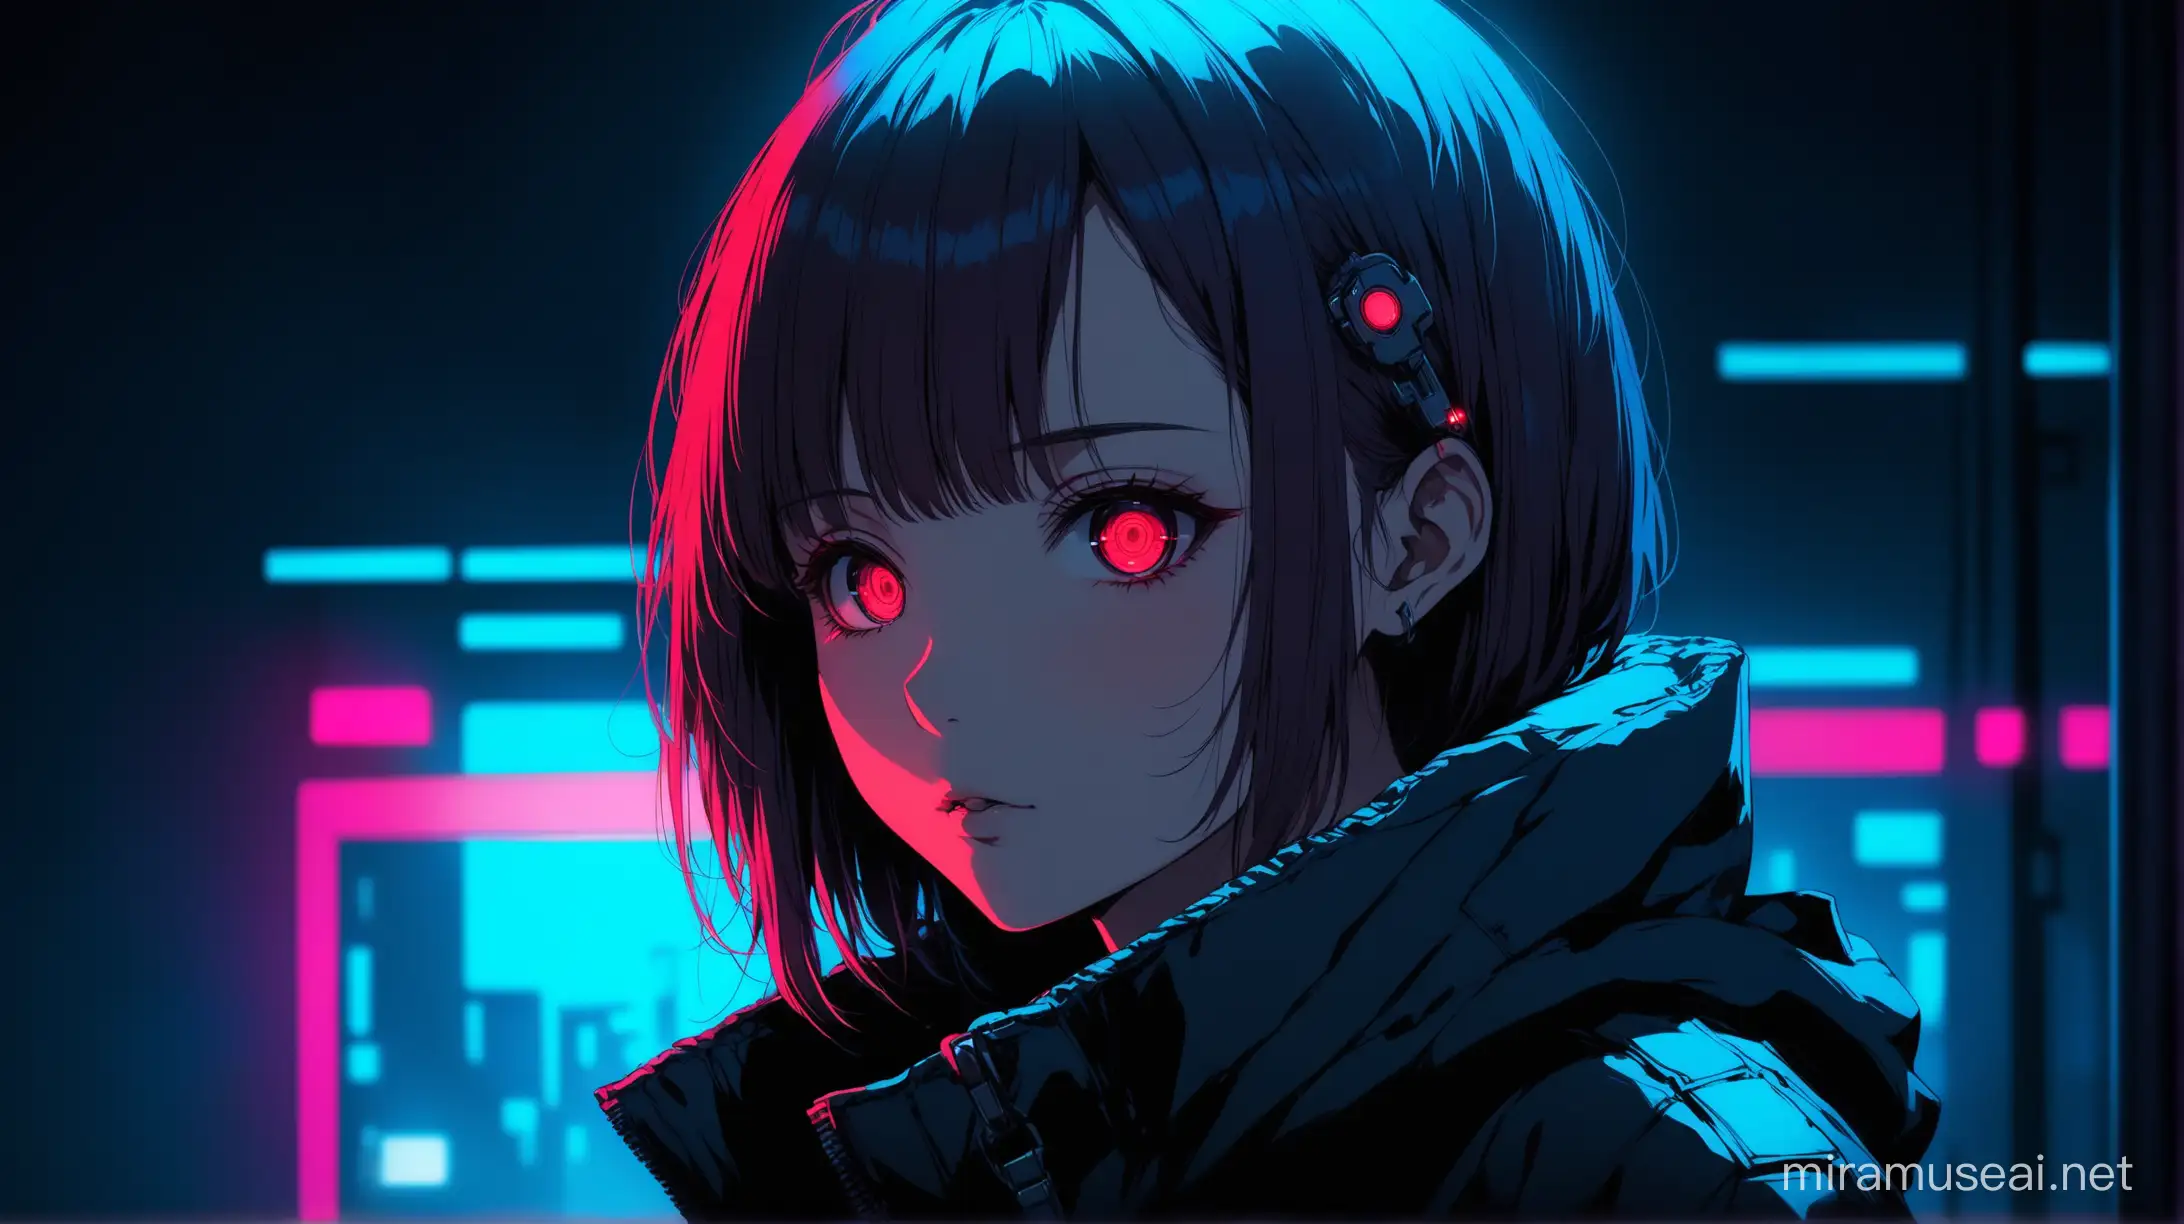 Anime Cyberpunk Girl in Red and Blue Lighting